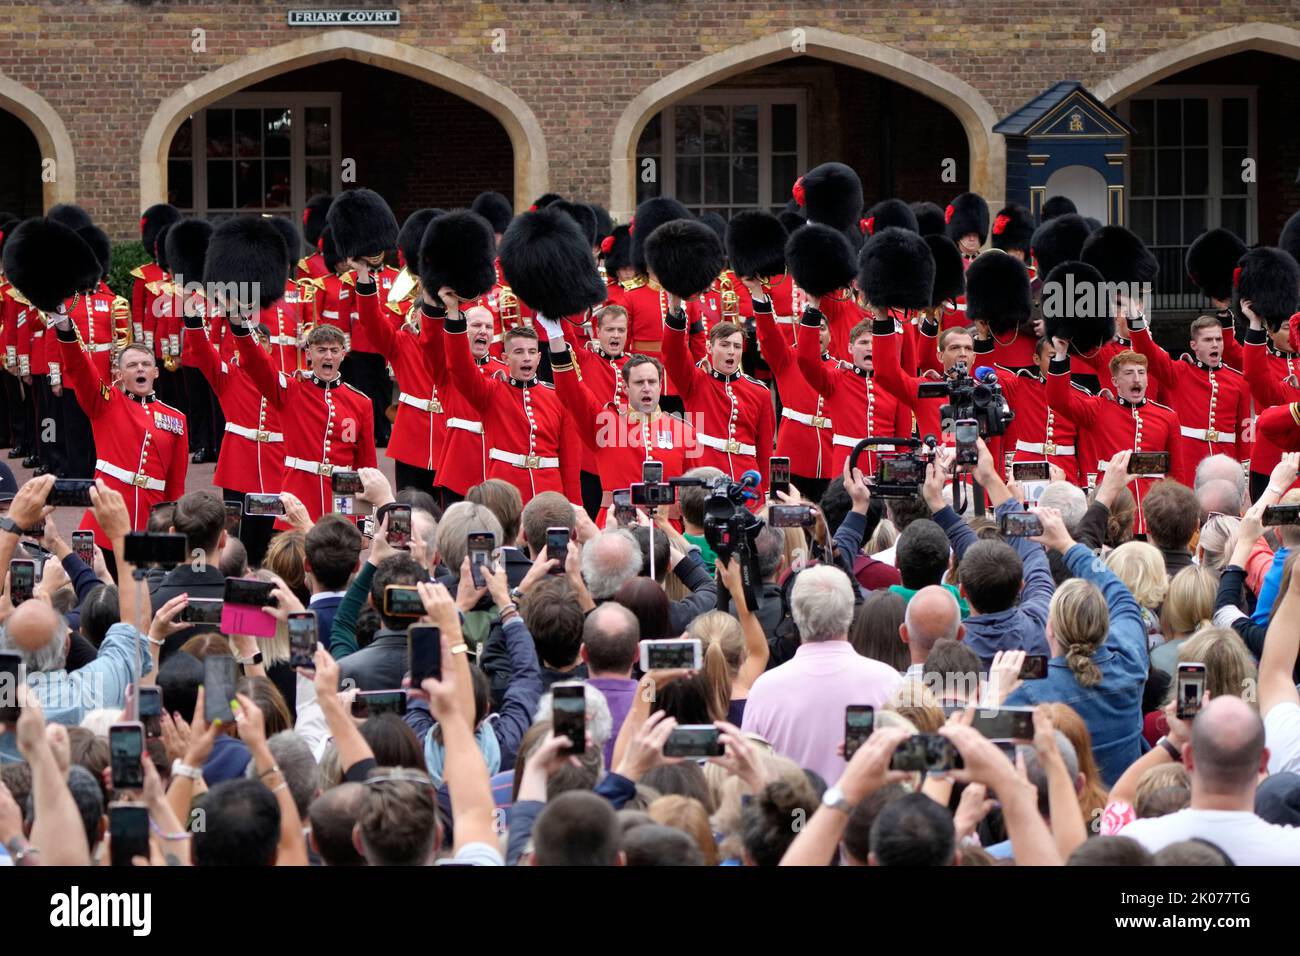 The public look on as members of the Coldstream guards cheer as the Principal Proclamation is read from the balcony overlooking Friary Court after the Accession Council ceremony at St James's Palace, London, where King Charles III was formally proclaimed monarch. Charles automatically became King on the death of his mother, but the Accession Council, attended by Privy Councillors, confirms his role. Picture date: Saturday September 10, 2022. Stock Photo